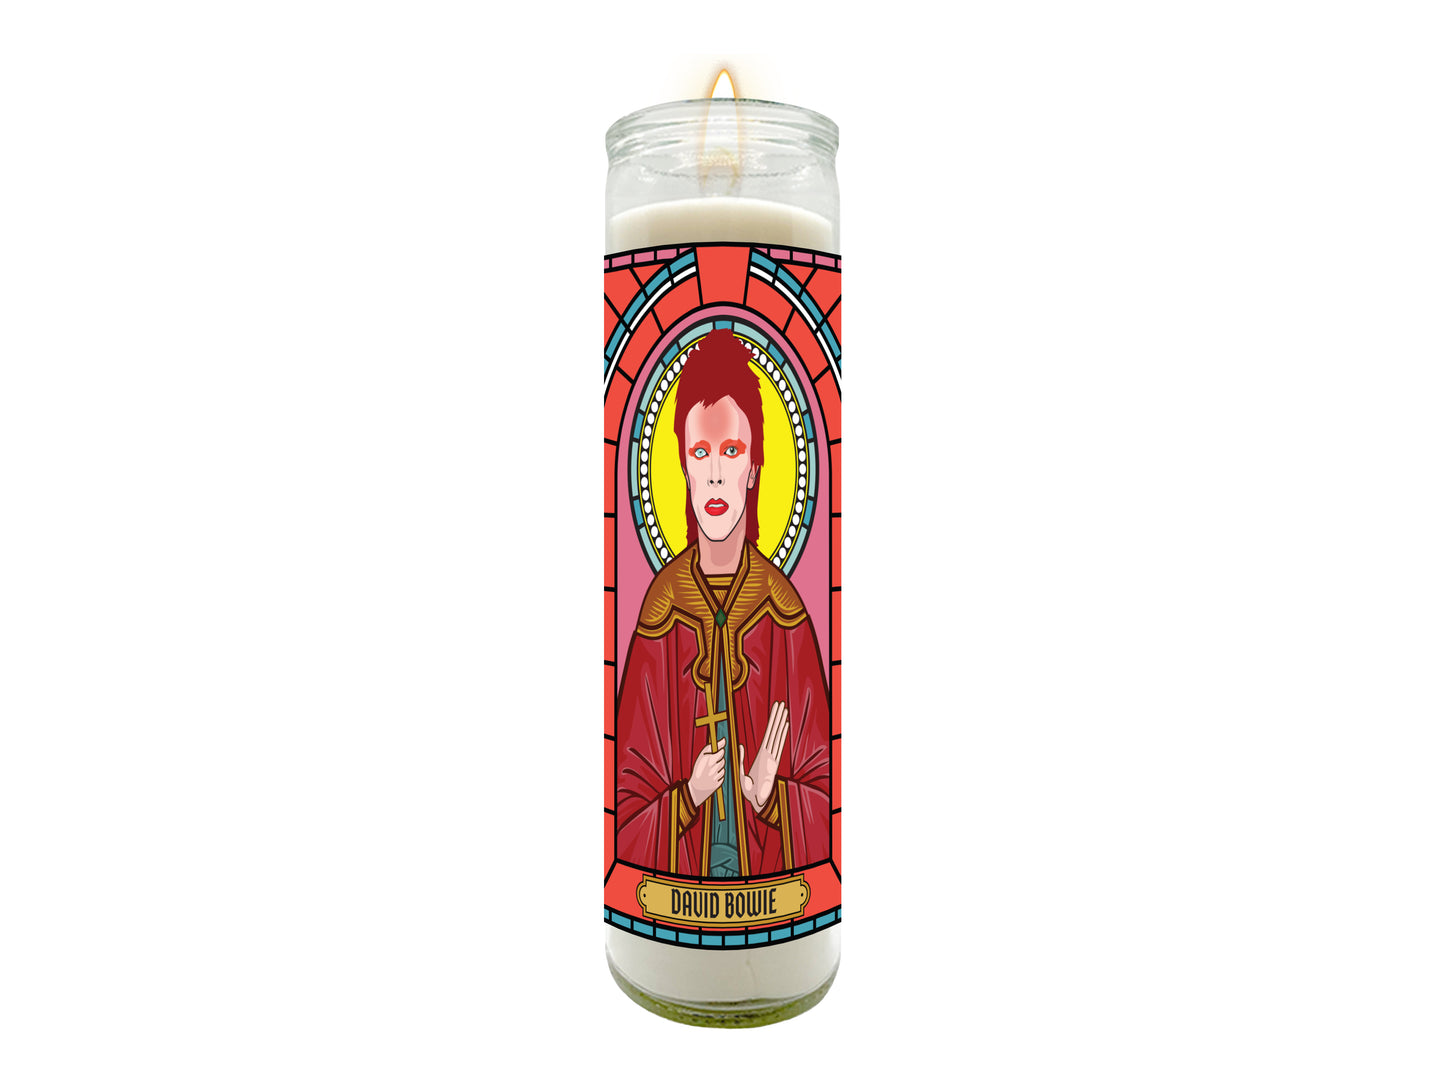 David Bowie Illustrated Prayer Candle